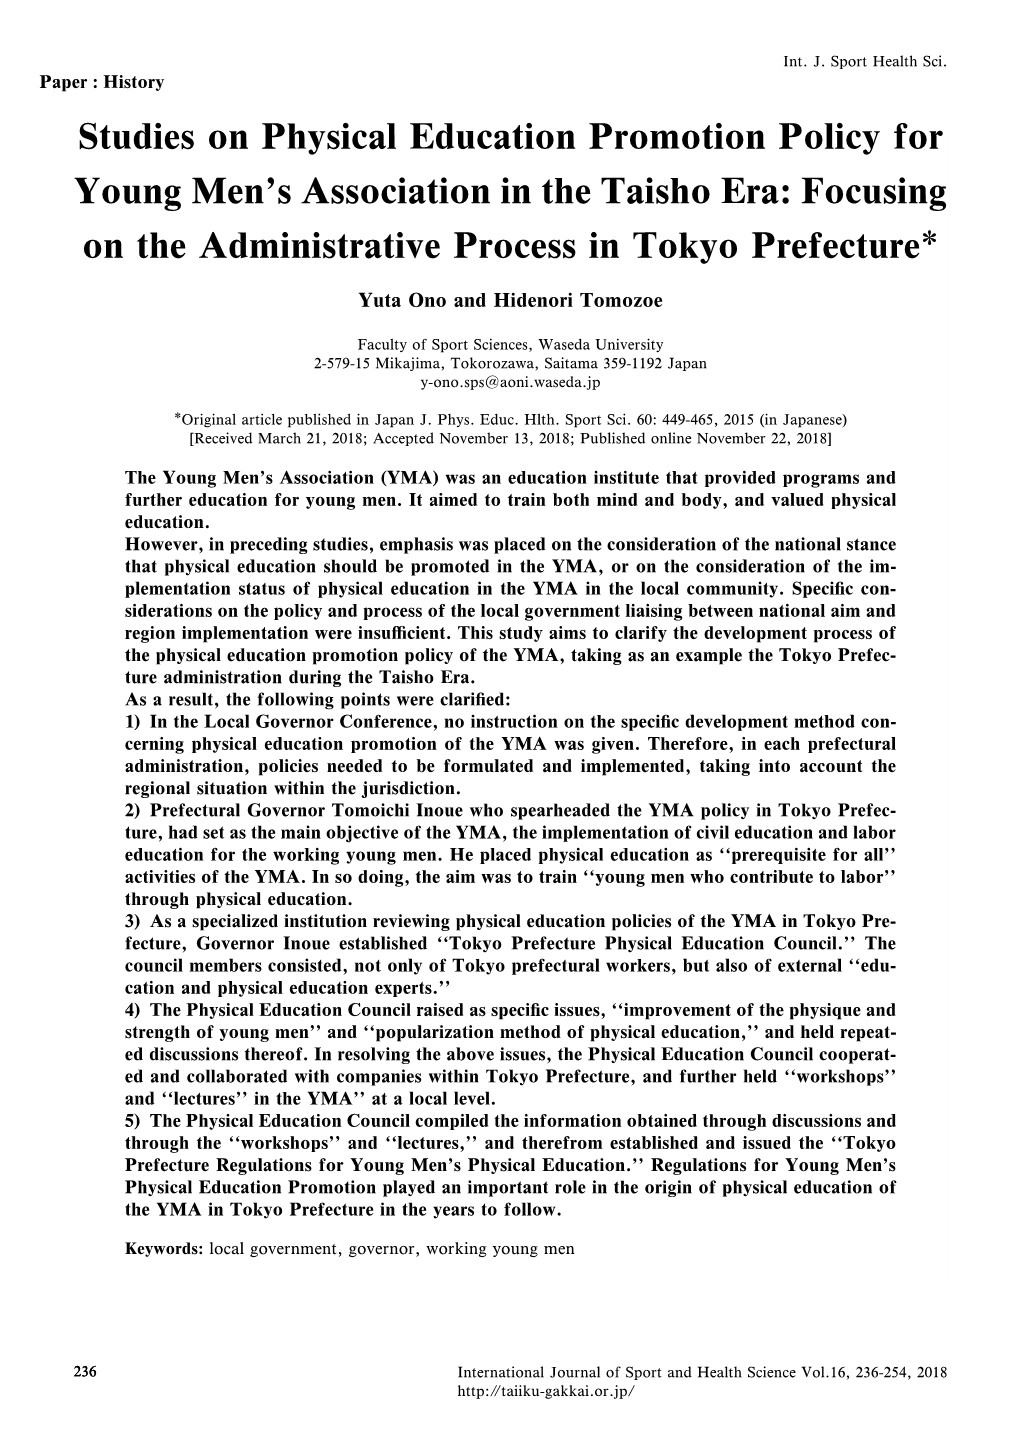 Studies on Physical Education Promotion Policy for Young Men's Association in the Taisho Era: Focusing on the Administrative Process in Tokyo Prefecture*